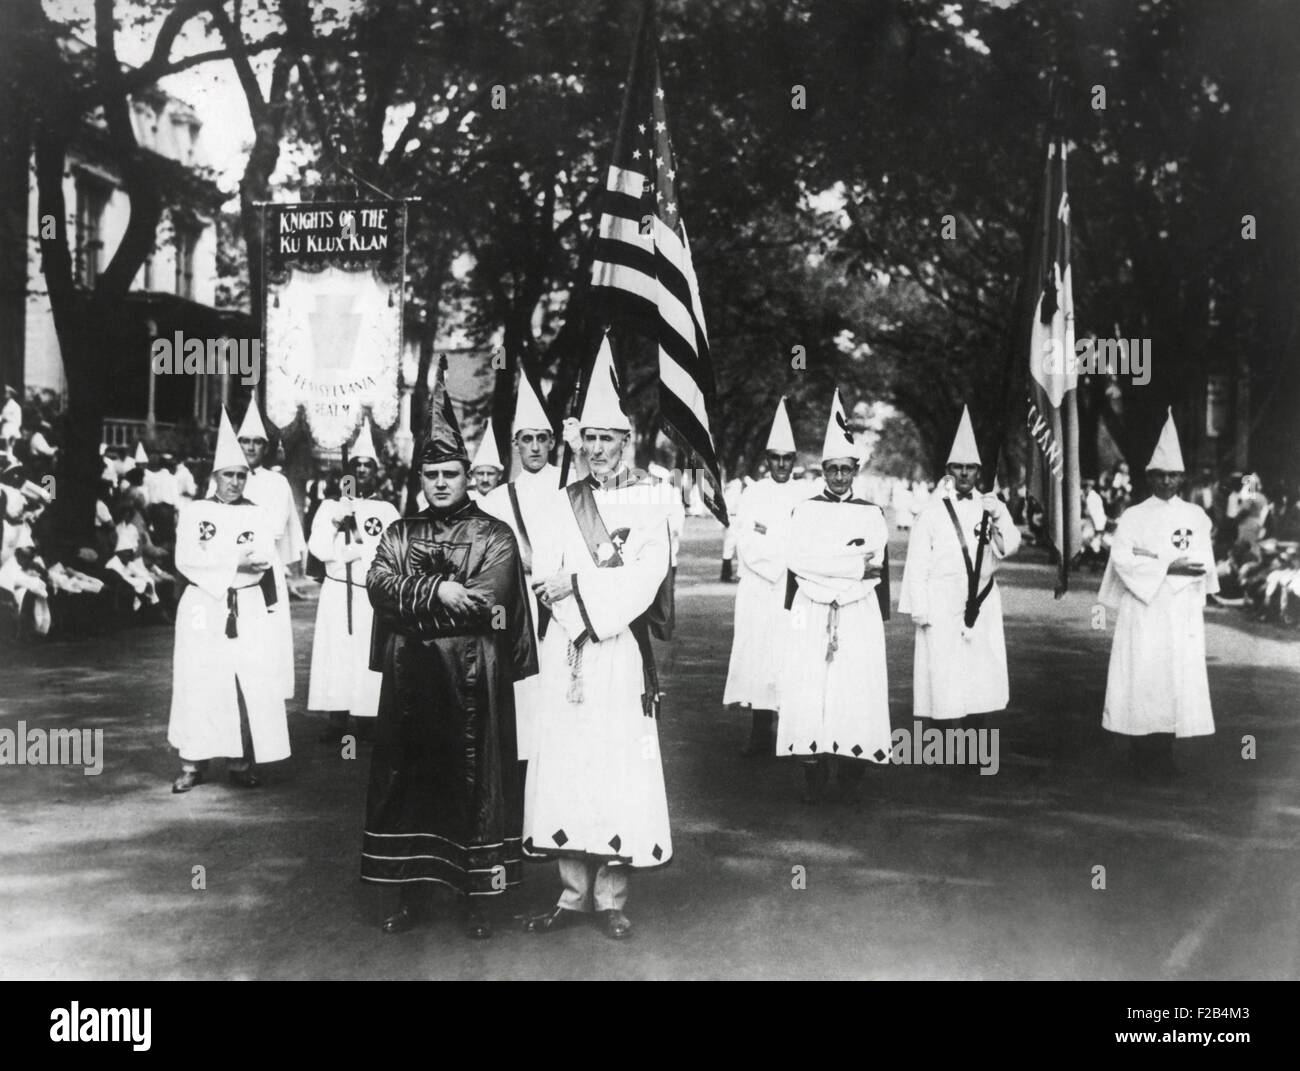 Ku Klux Klan parade in Pennsylvania, ca. 1925. Inspired by D. W. Griffith's film 'Birth of A Nation' and fueled by the entrepreneur, William Joseph Simmons, the KKK was brought back to life in the South and expanded into the Mid-west in the 1920s. - (BSLOC 2015 1 203) Stock Photo